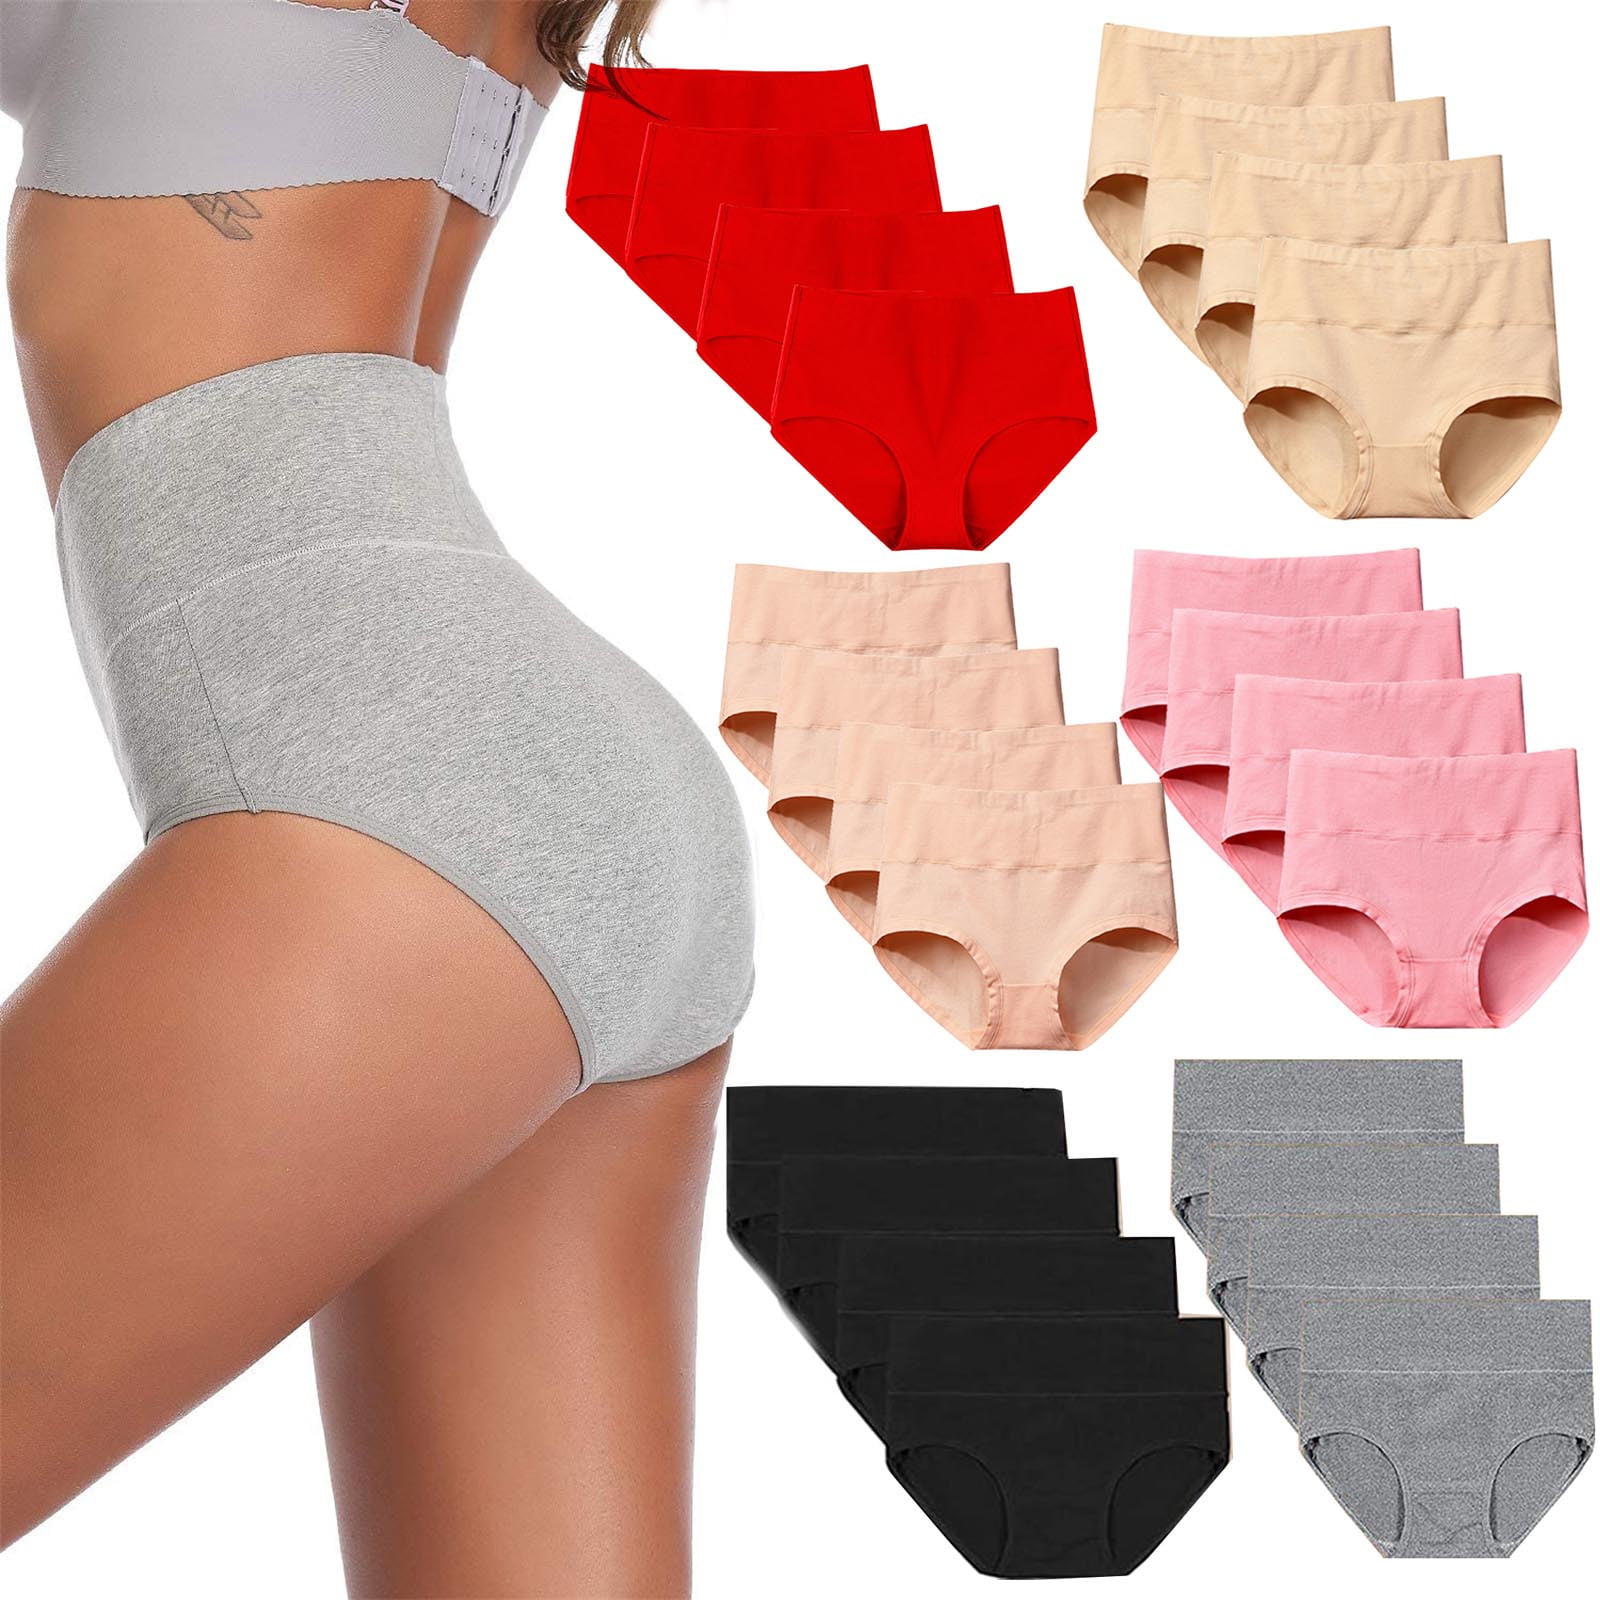 SHINEMART Women's Cotton Stretch Underwear Briefs All Day Cool Your Body  Soft Breathable Ladies Panties Multi Pack of 4